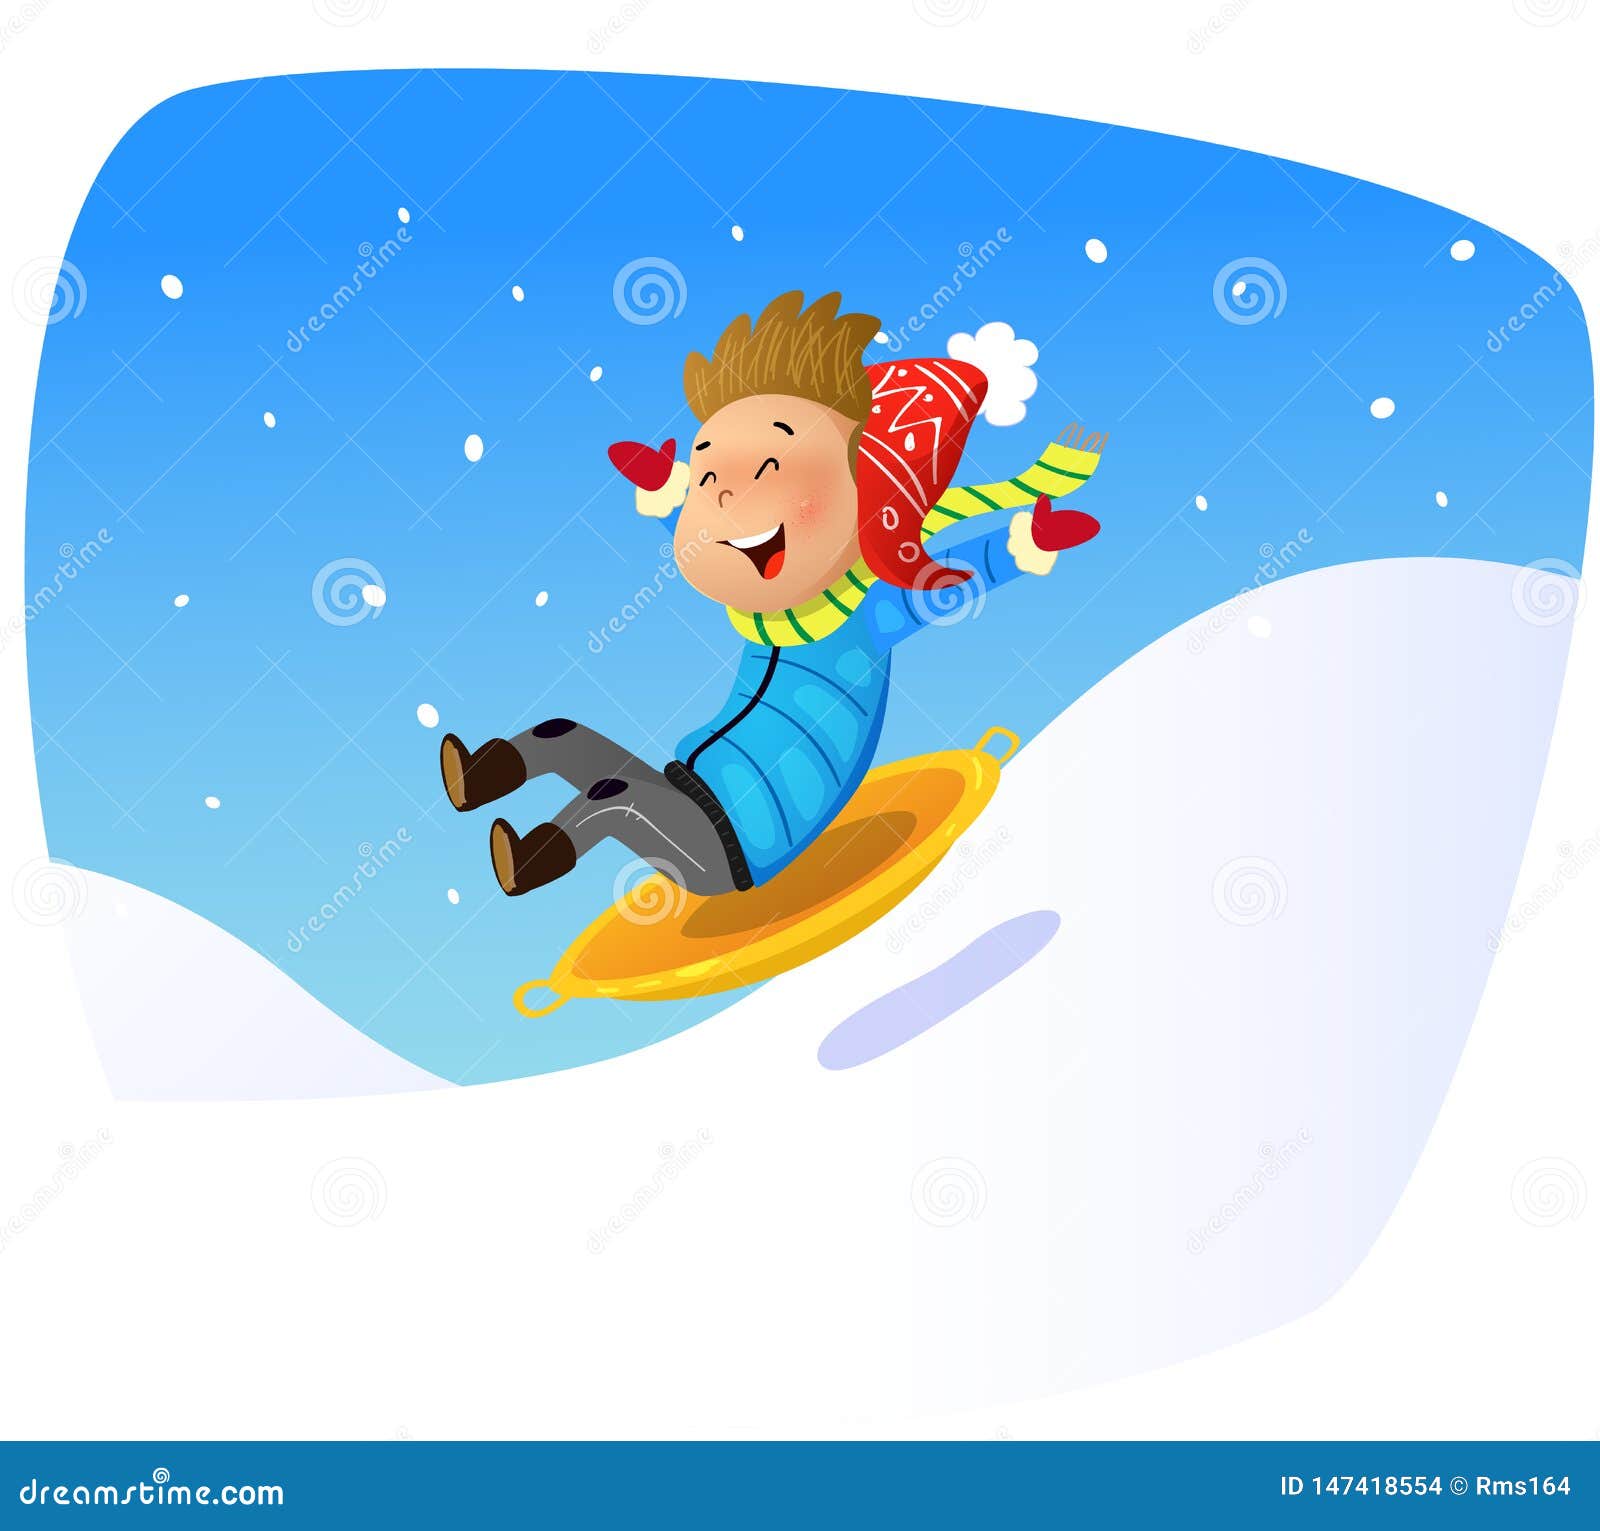 Cartoon Kid Rolling Down The Mountain Slope On Sled Vector Illustration ...